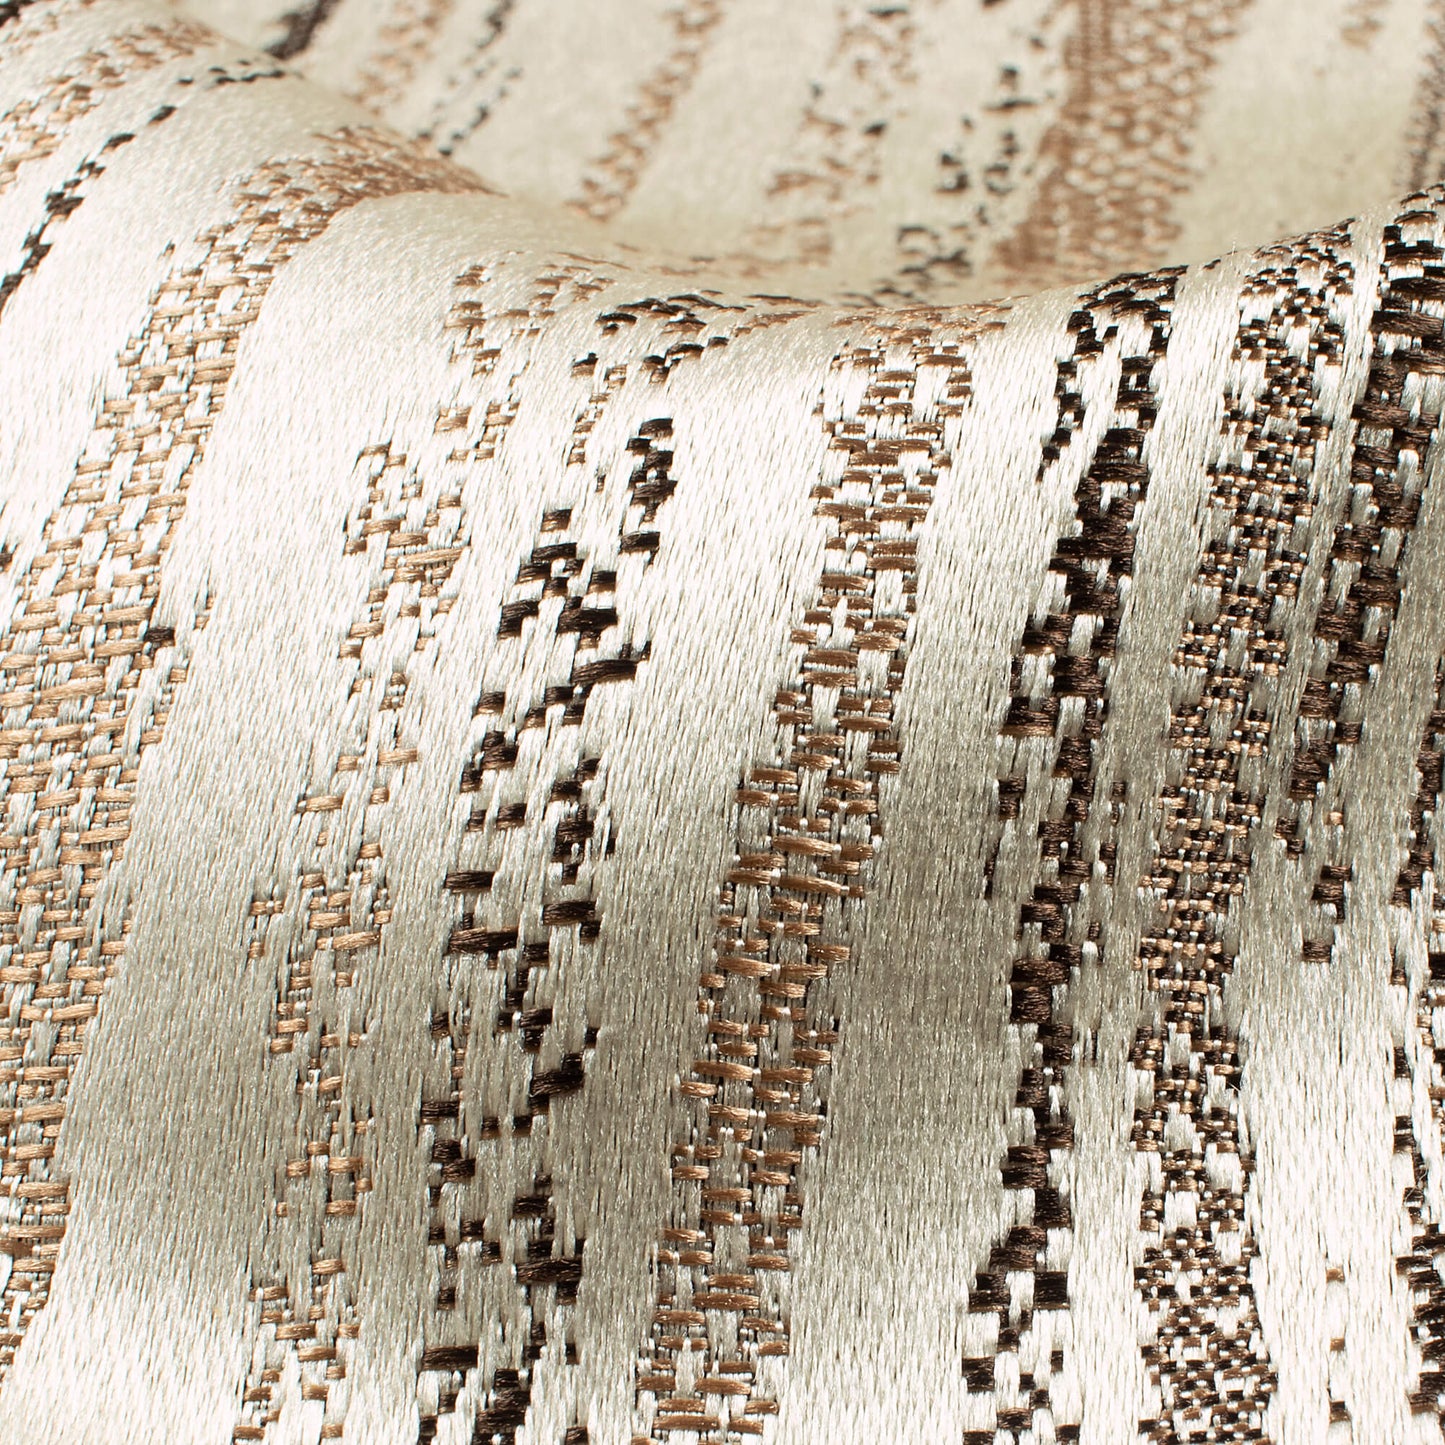 White And Mocha Brown Self Textured Jacquard Premium Curtain Fabric (Width 48 Inches)